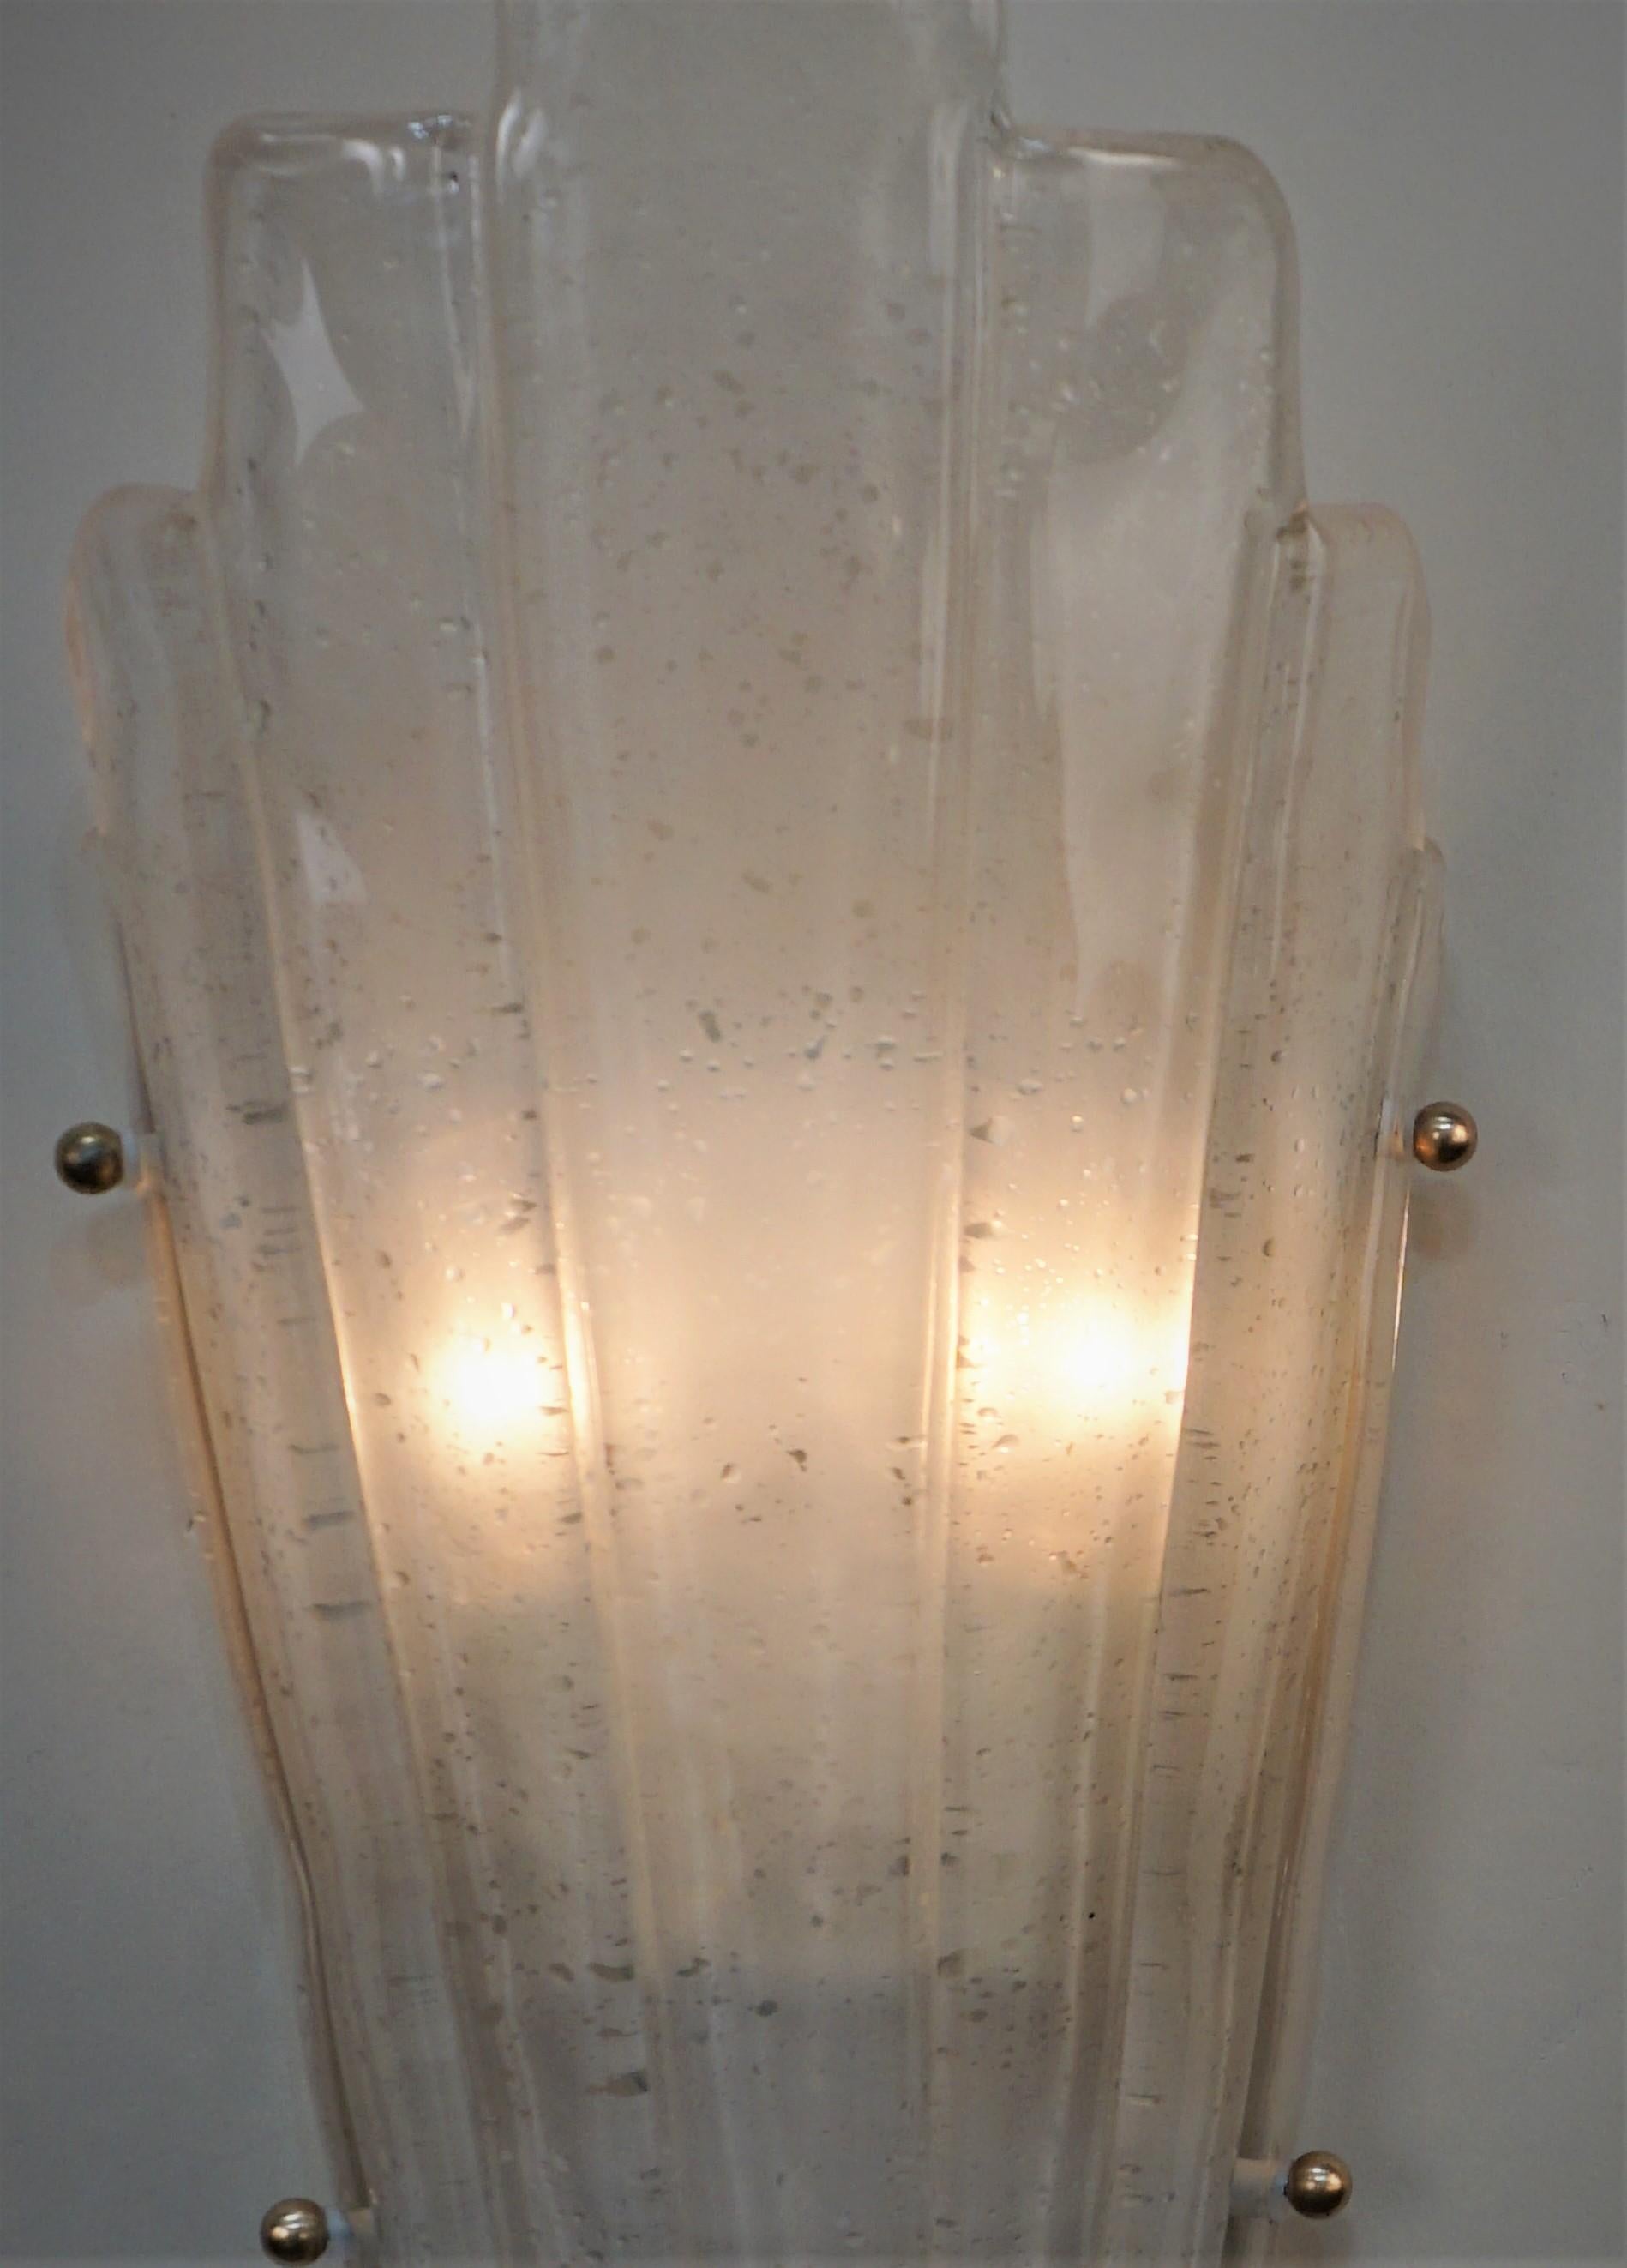 Set of four blown clear frost with texture Murano glass wall sconces with double light in each.
Two pairs are available, price is for one pair.
 